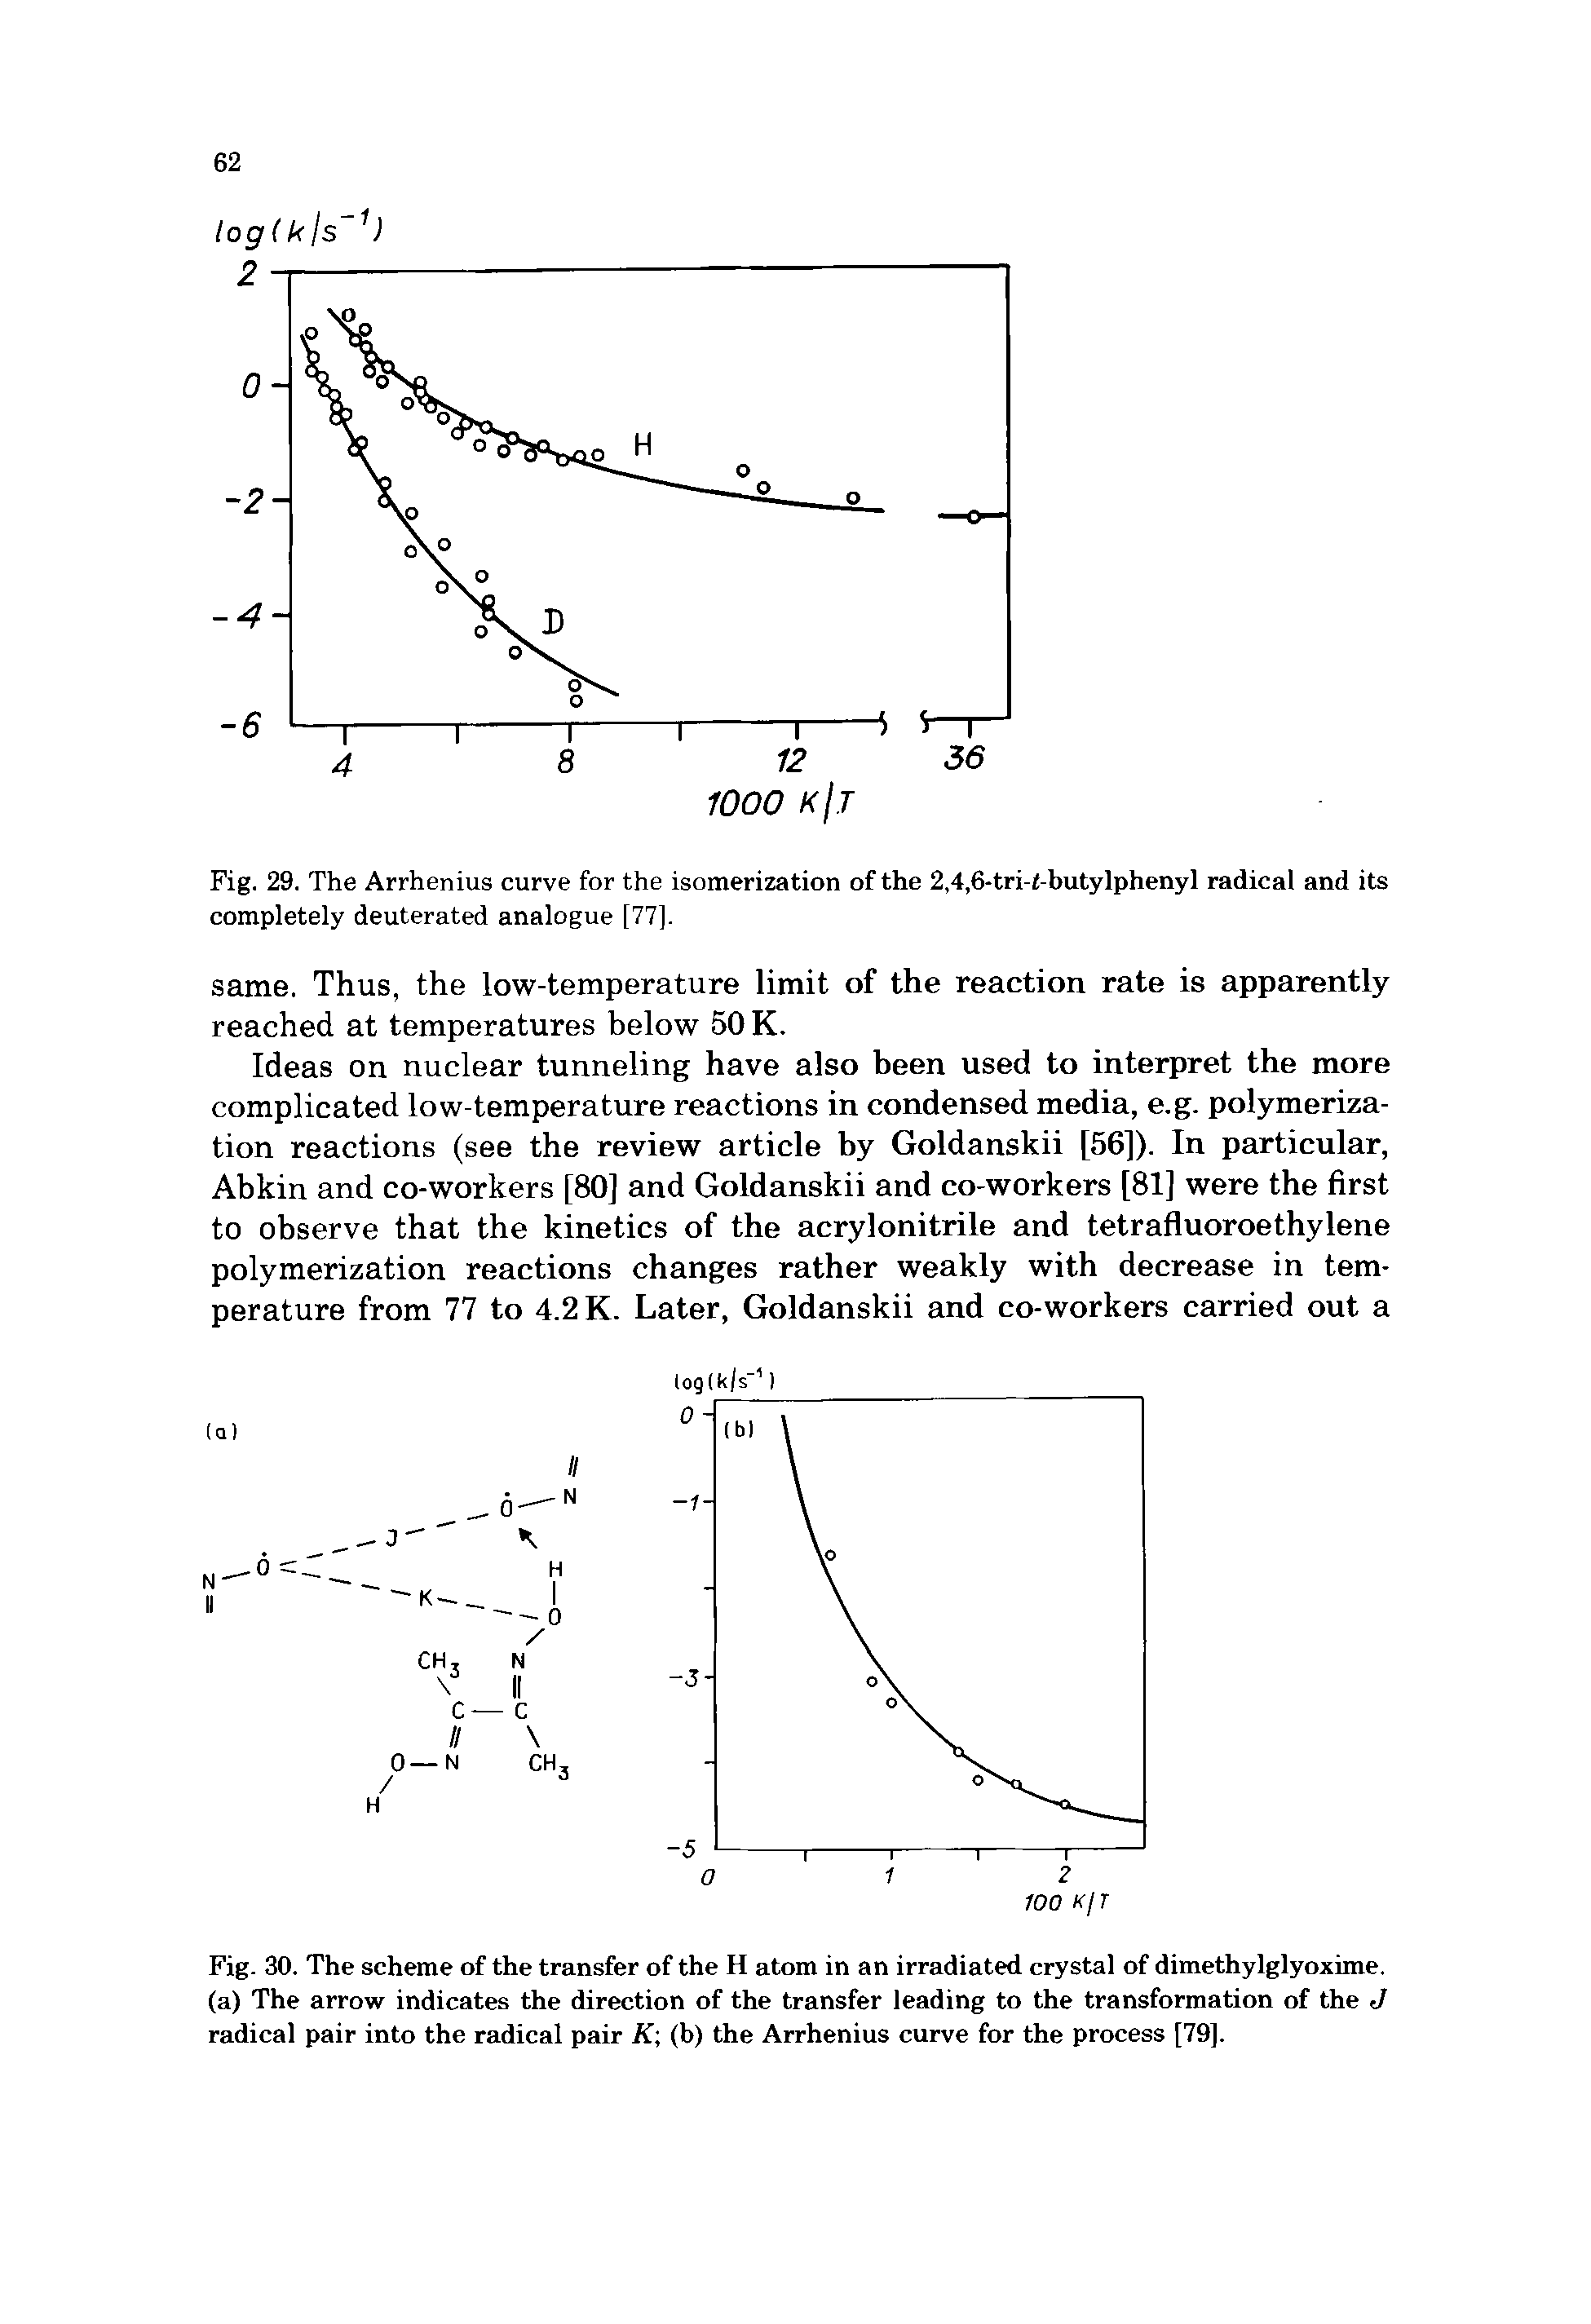 Fig. 29. The Arrhenius curve for the isomerization of the 2,4,6-tri-t-butylphenyl radical and its completely deuterated analogue [77],...